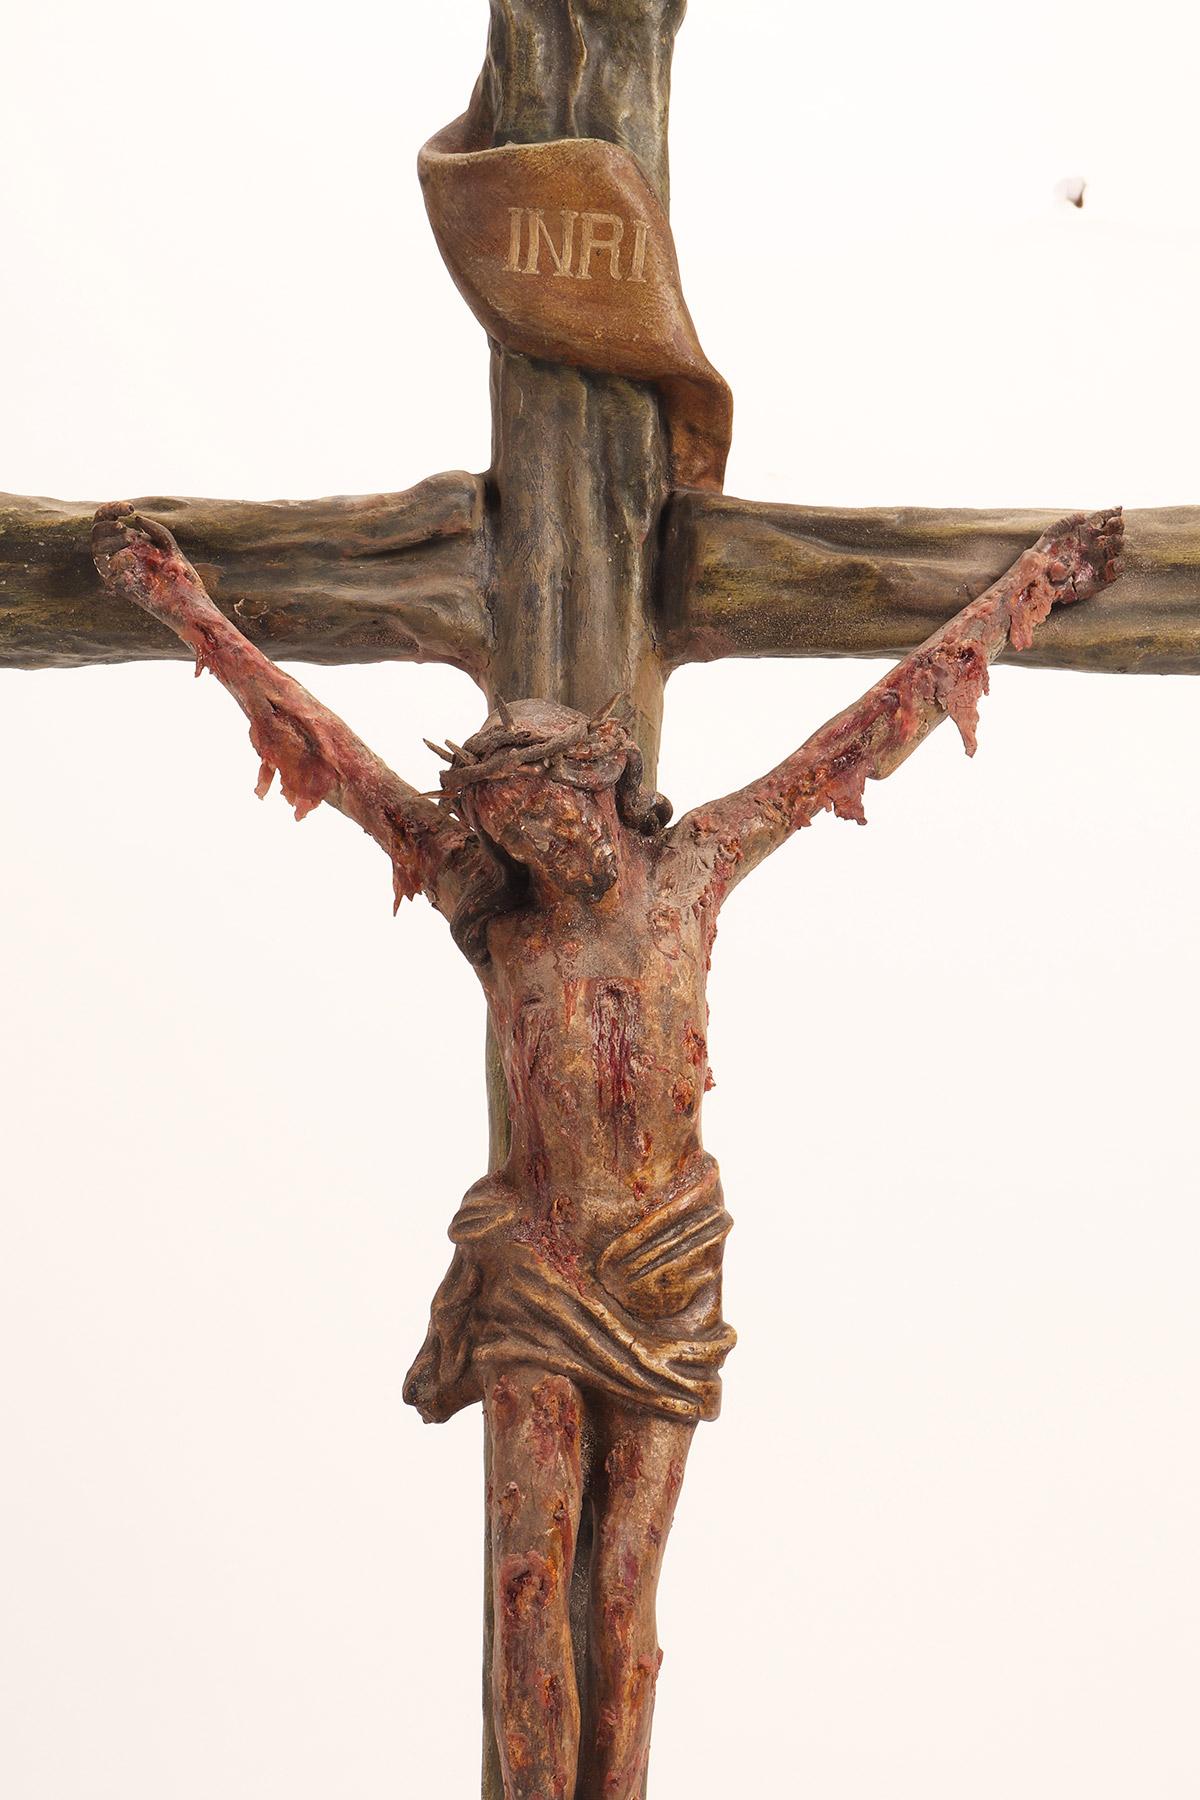 Crucifix on Calvary, called 'Pestis Christi' or Crucifiix Pestis 'Plague of Christ' or Plague Crucifix). The sculpture is composite, made with heterogeneous materials: wax, wood, papier-mâché. The octagonal base is slightly raised and supports the